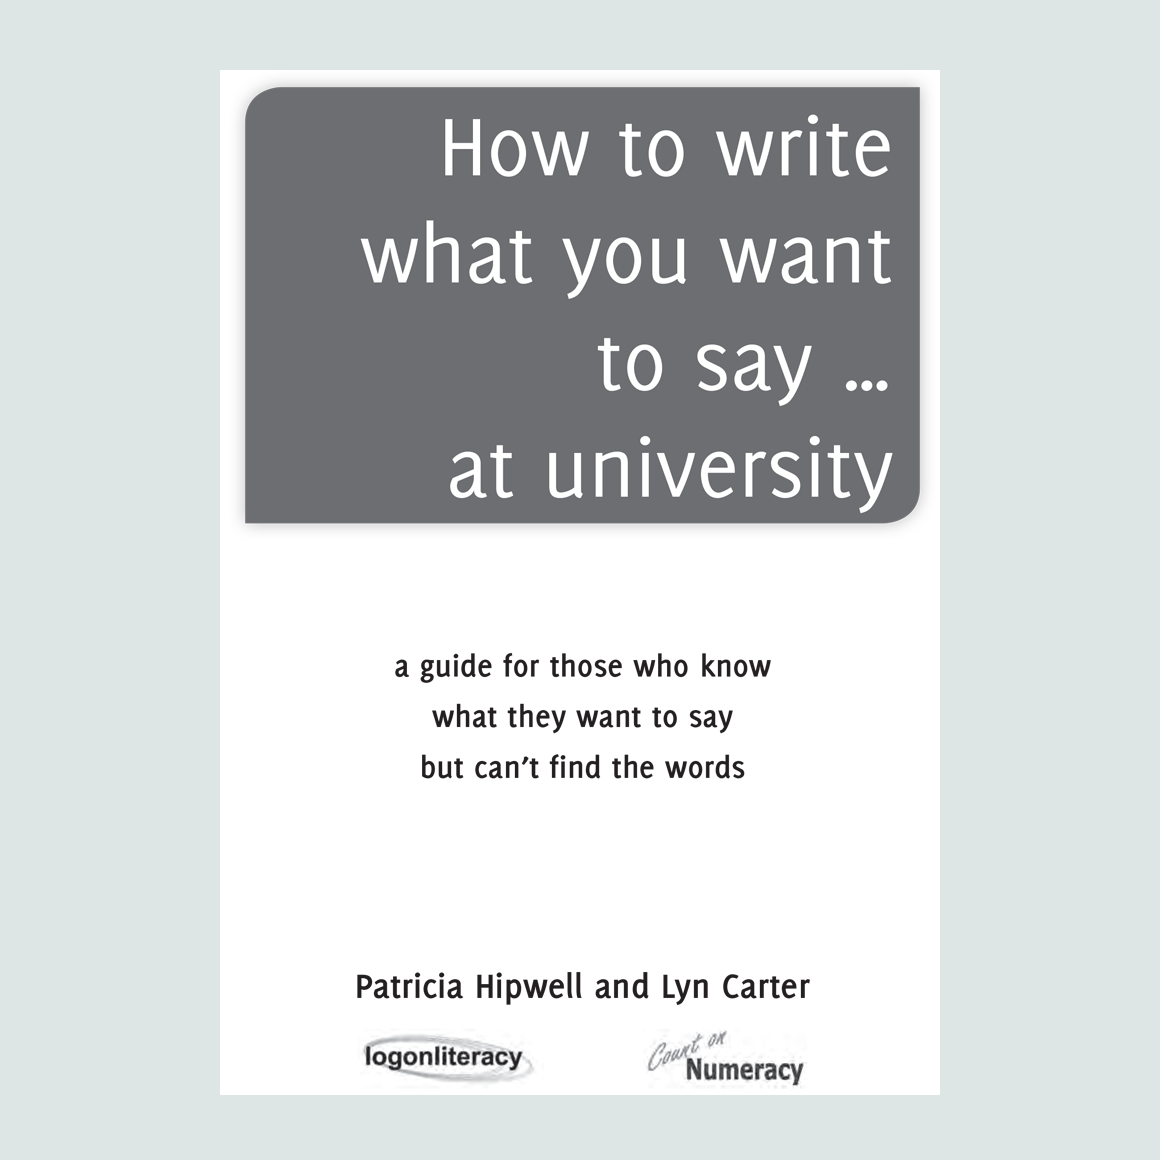 How to write what you want to say... at university